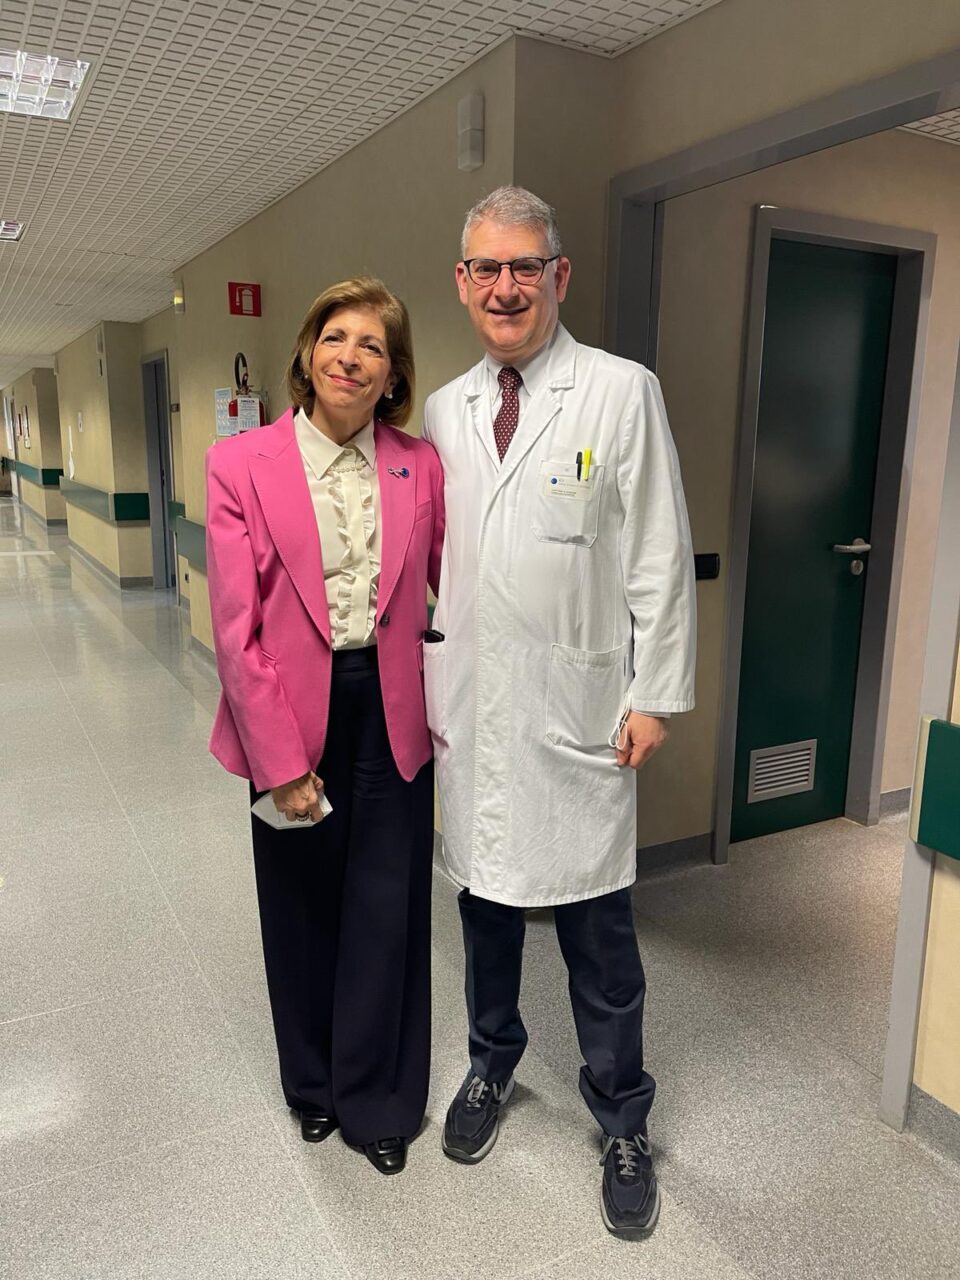 Giuseppe Curigliano: Grateful to Stella Kyriakides Commissioner for Health at European Commission for visiting European Institute of Oncology (IEO)